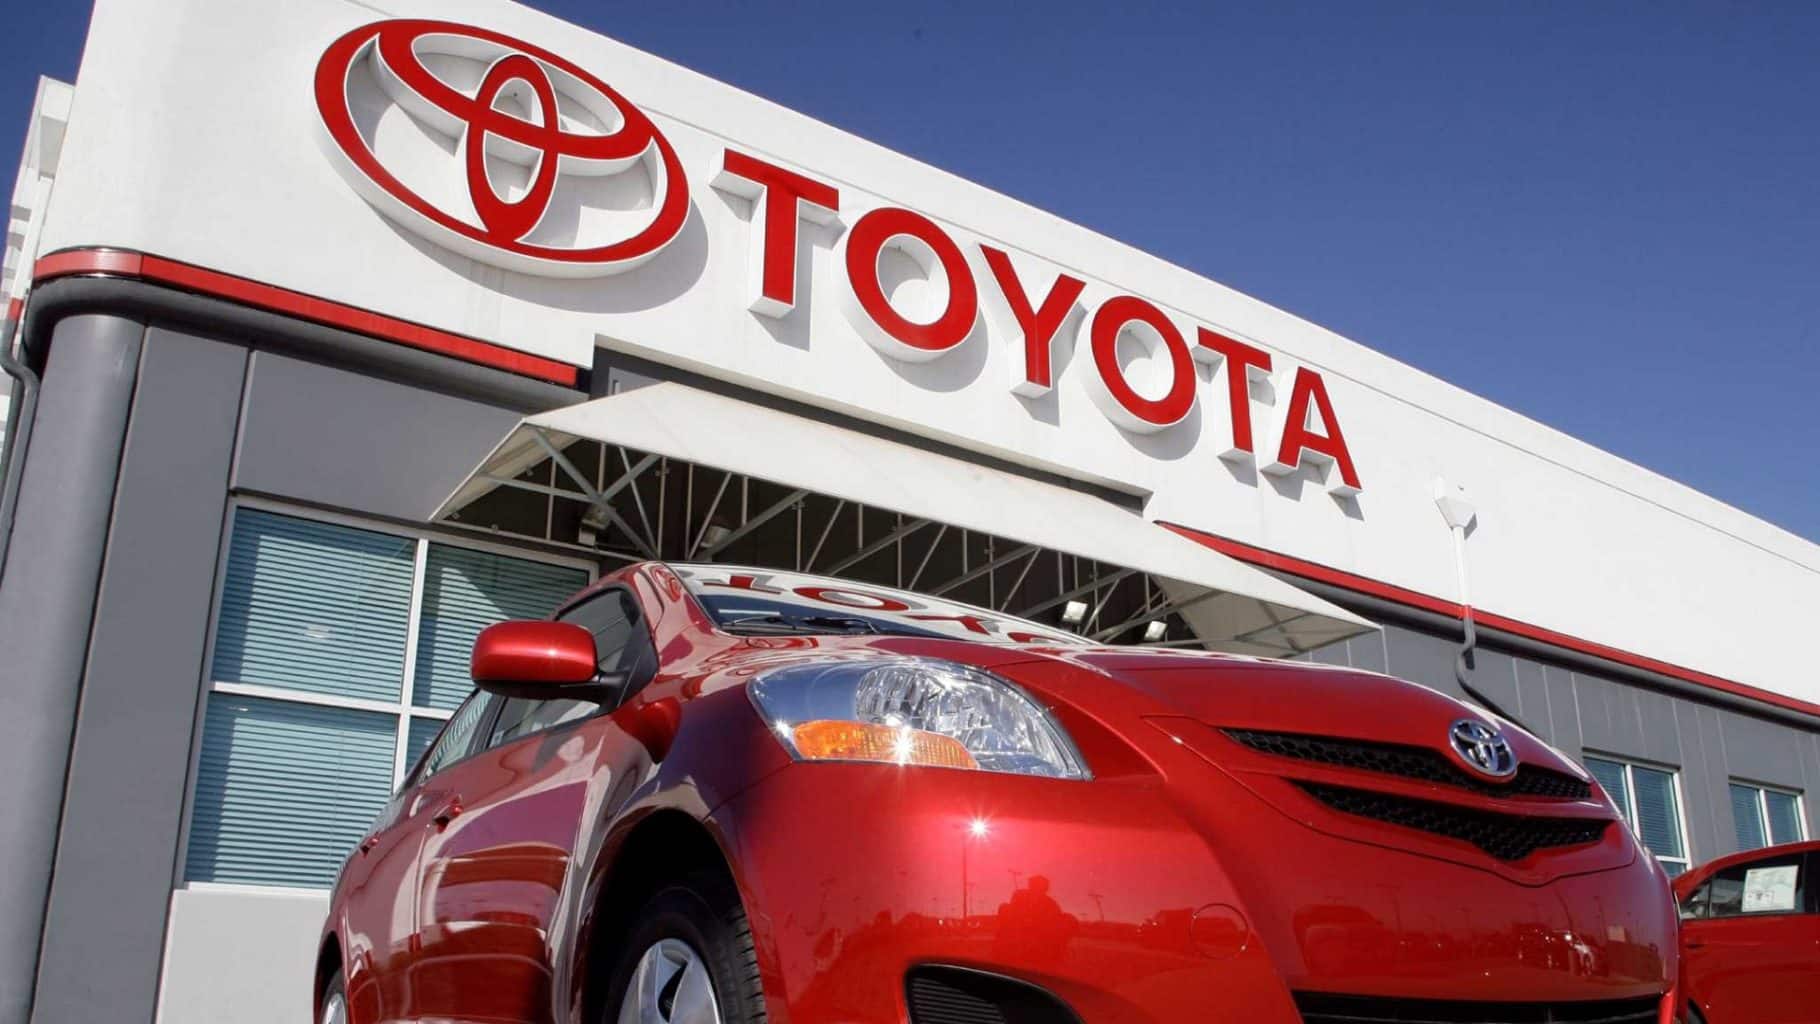 RCTA Toyota: What Does It Mean?